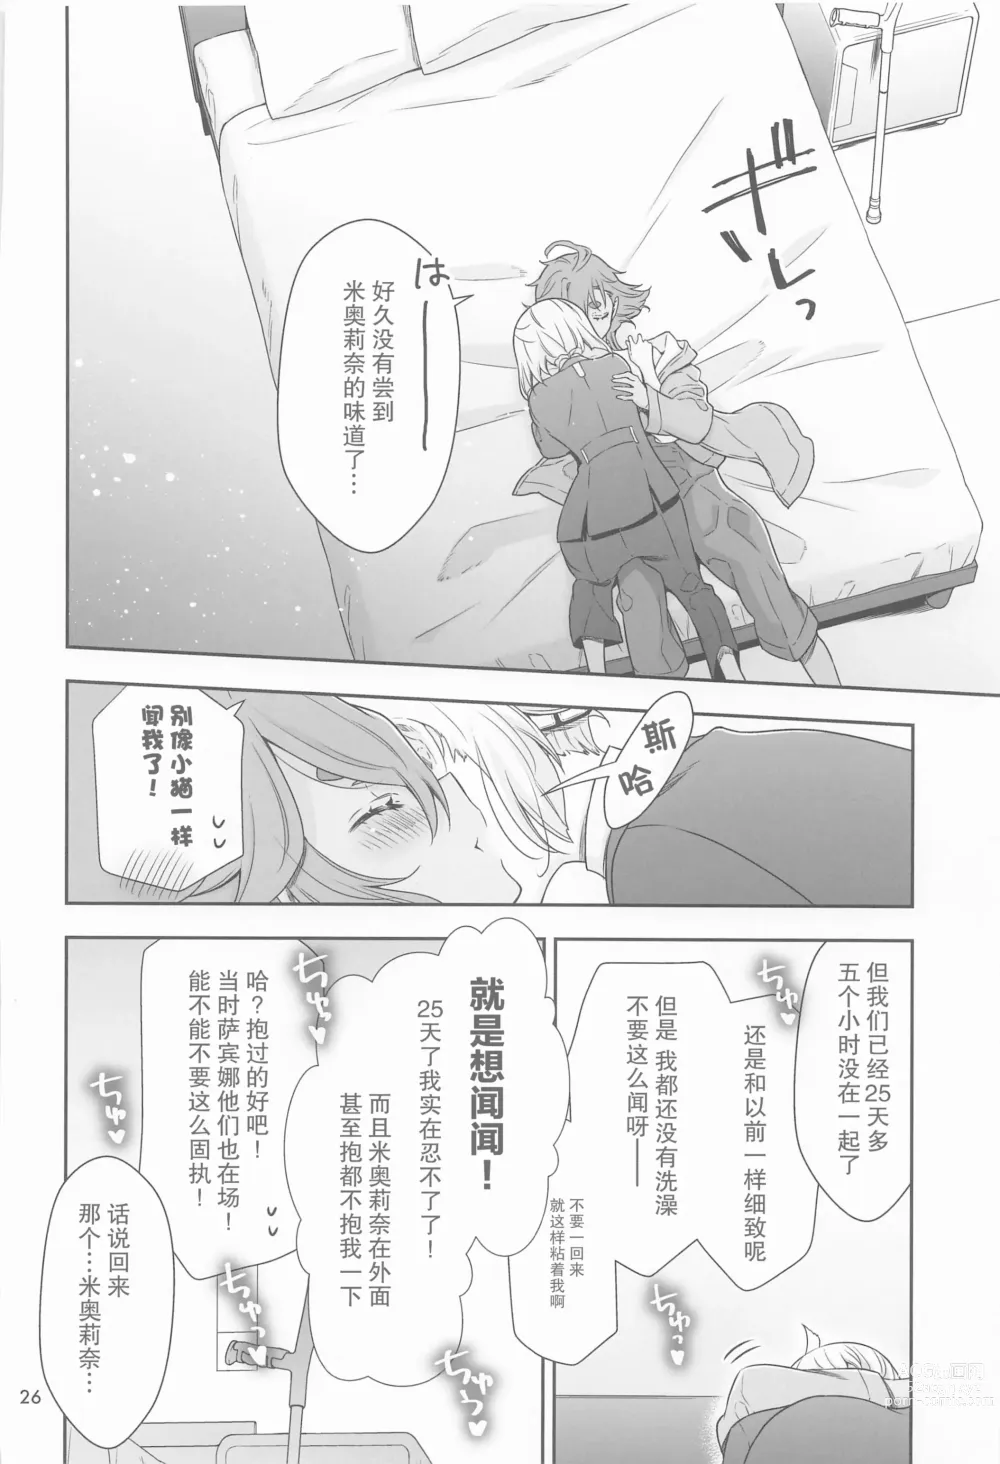 Page 25 of doujinshi 祝福之日